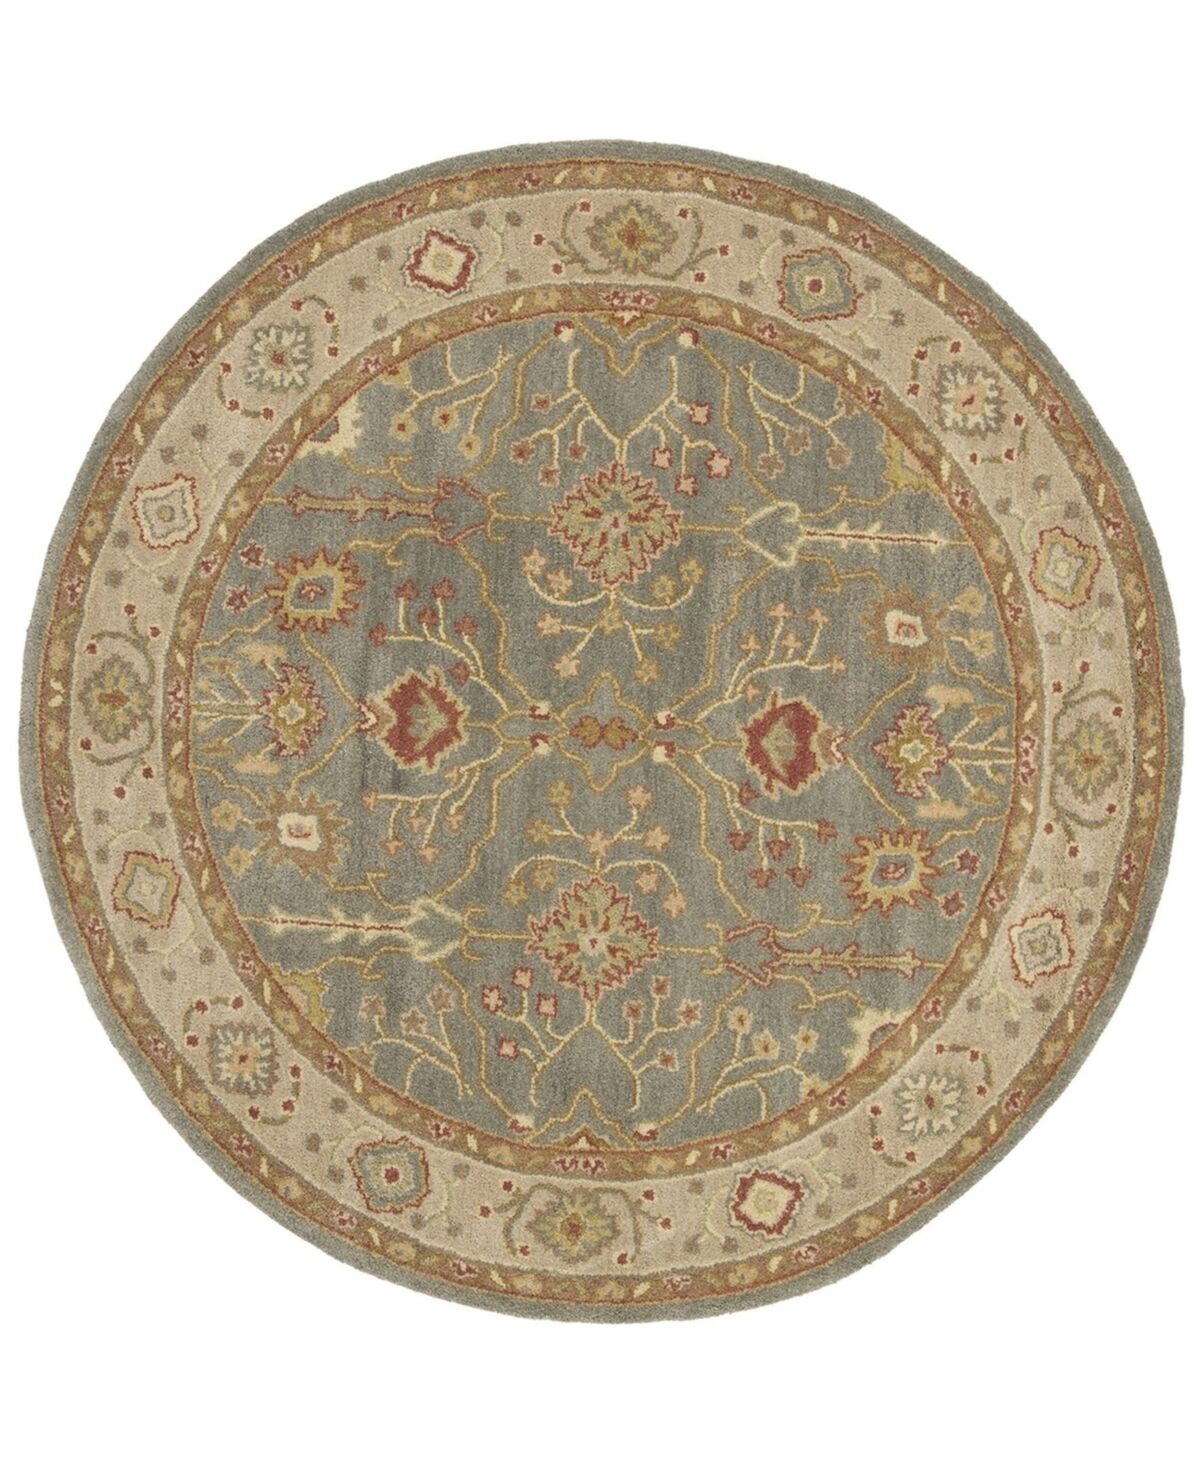 Safavieh Antiquity At314 Blue and Ivory 6' x 6' Round Area Rug - Blue